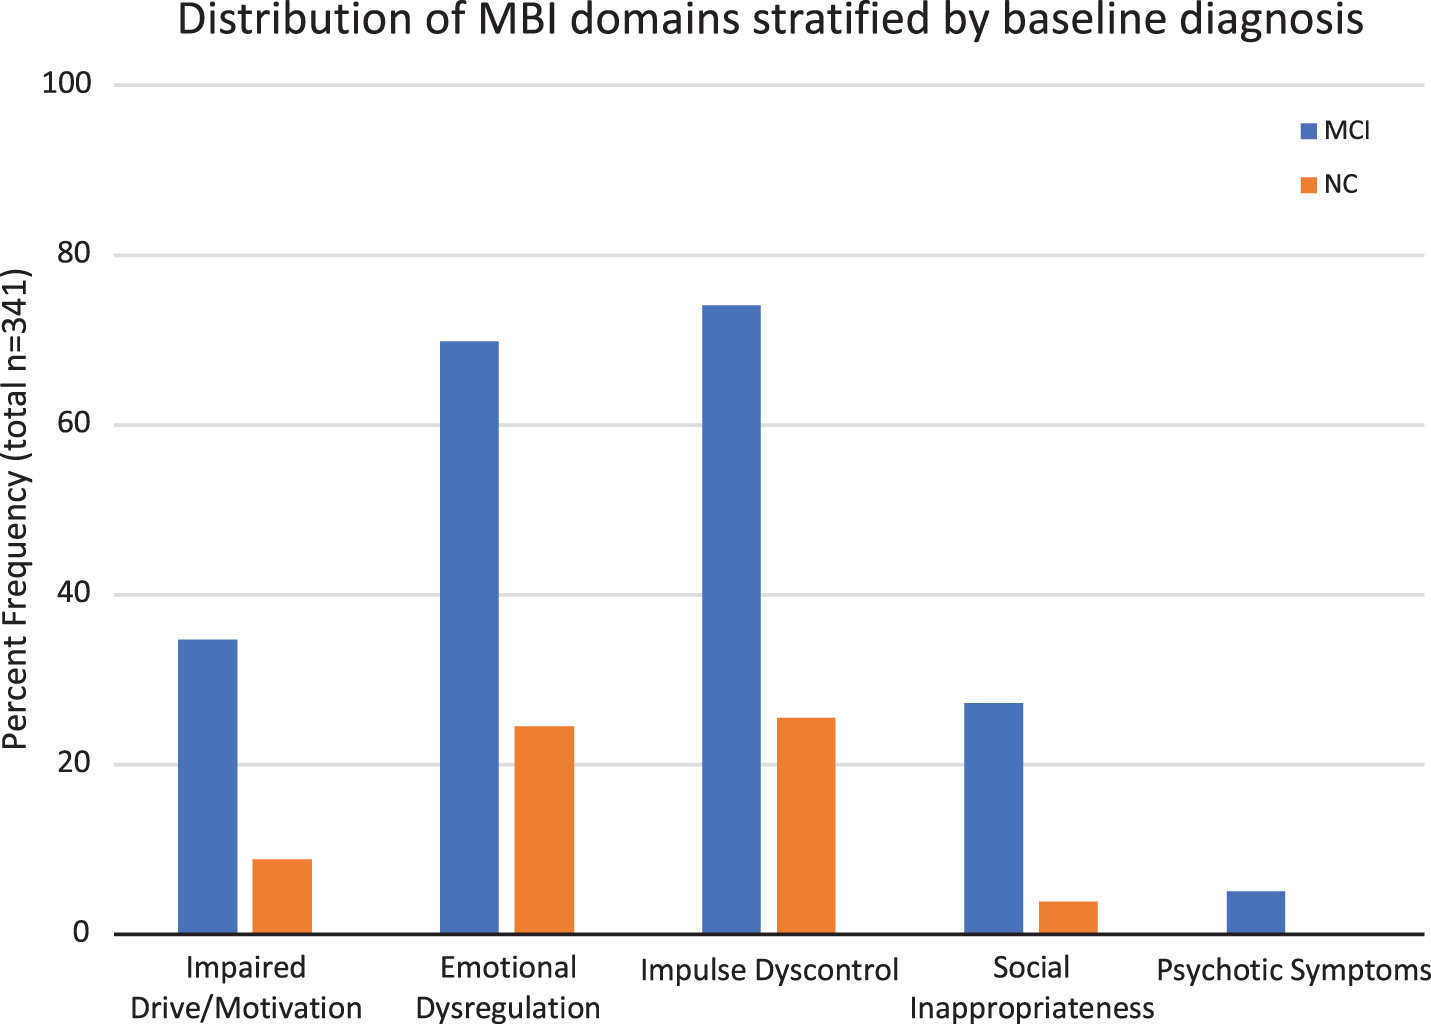 Frequency distribution of MBI domains in individuals with normal cognition (NC, n = 102) and mild cognitive impairment (MCI, n = 238).